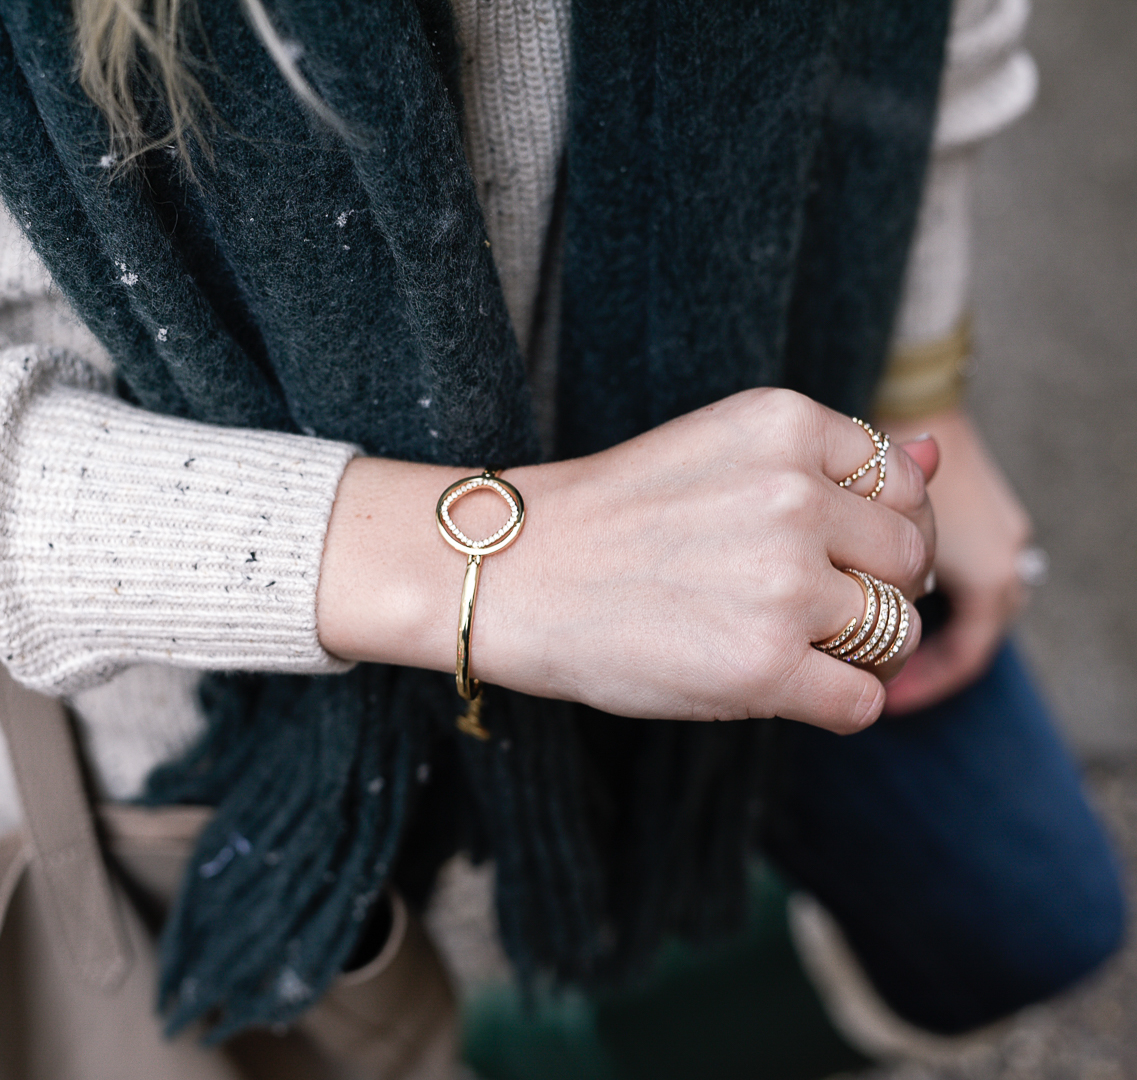 Circle bracelet for everyday weekend outfits! 